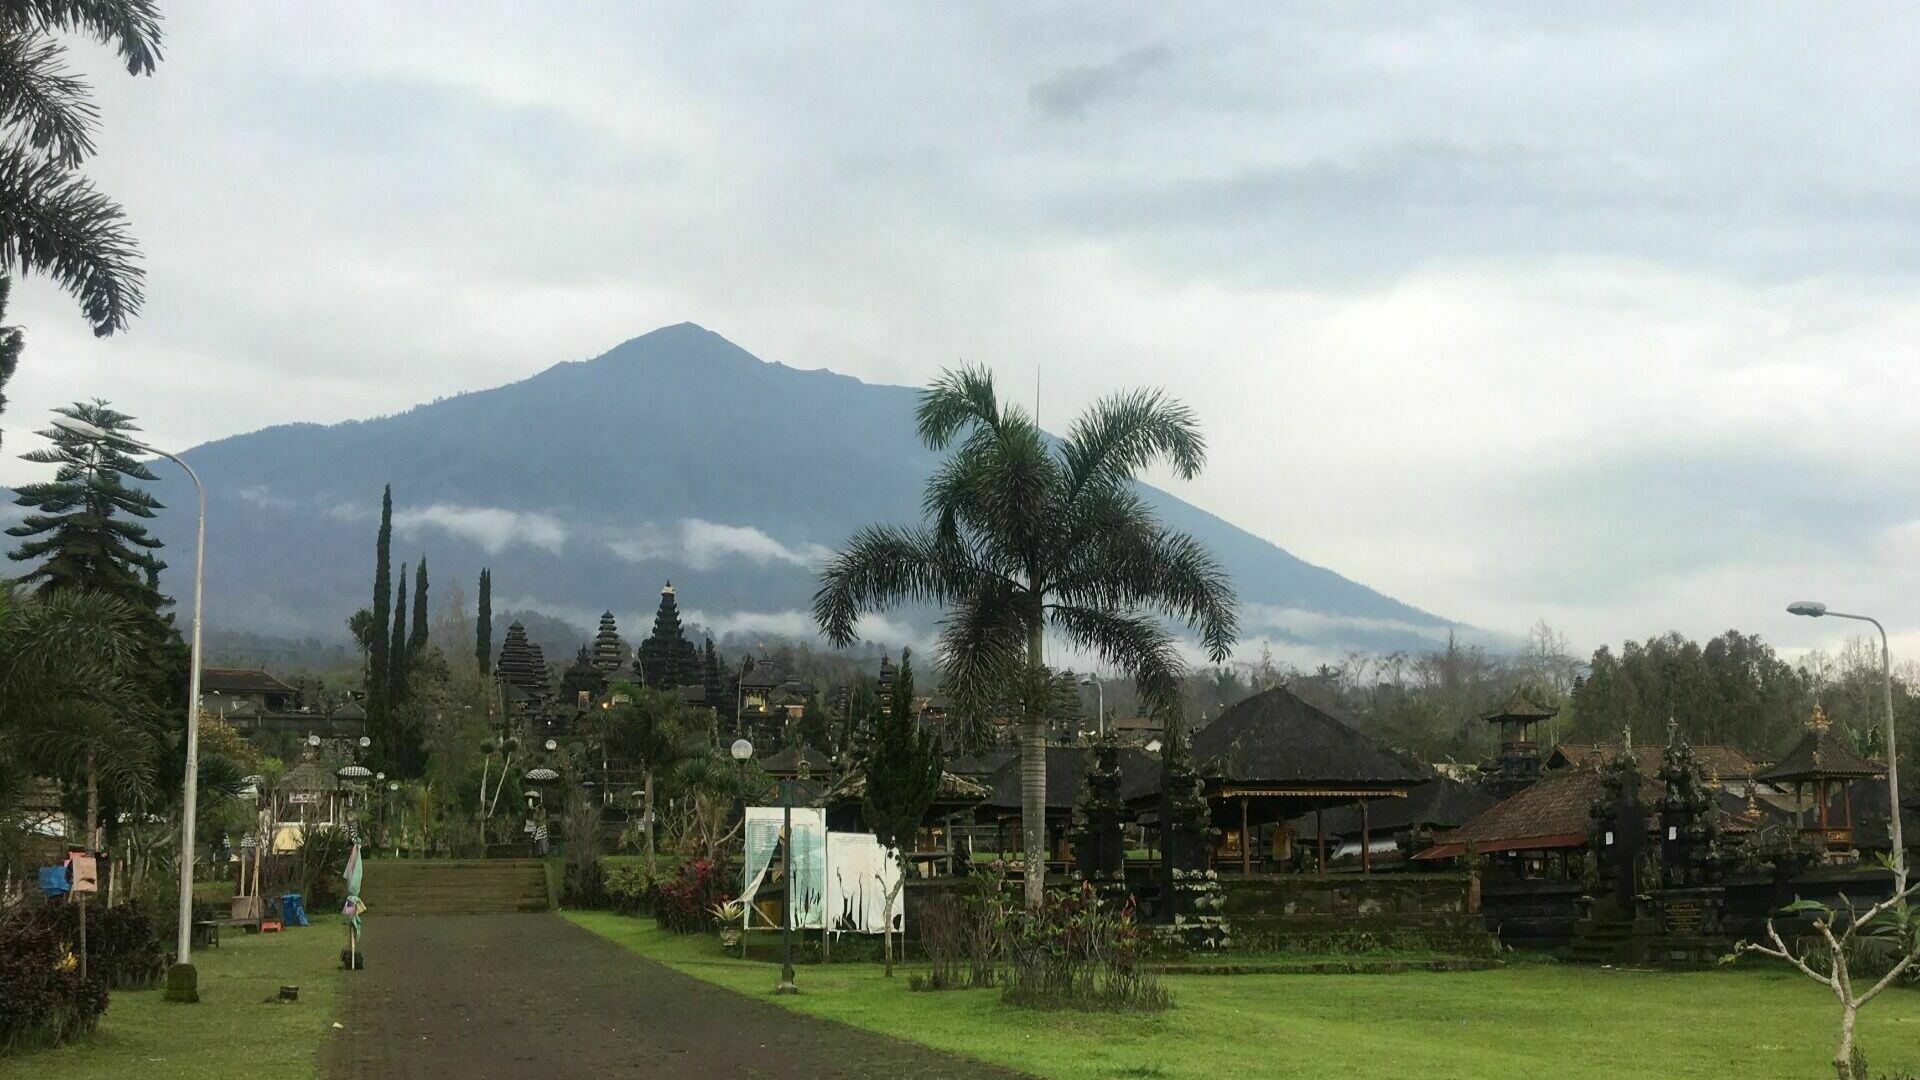 Bali authorities have deported a Russian blogger who took off his pants on the Agung volcano